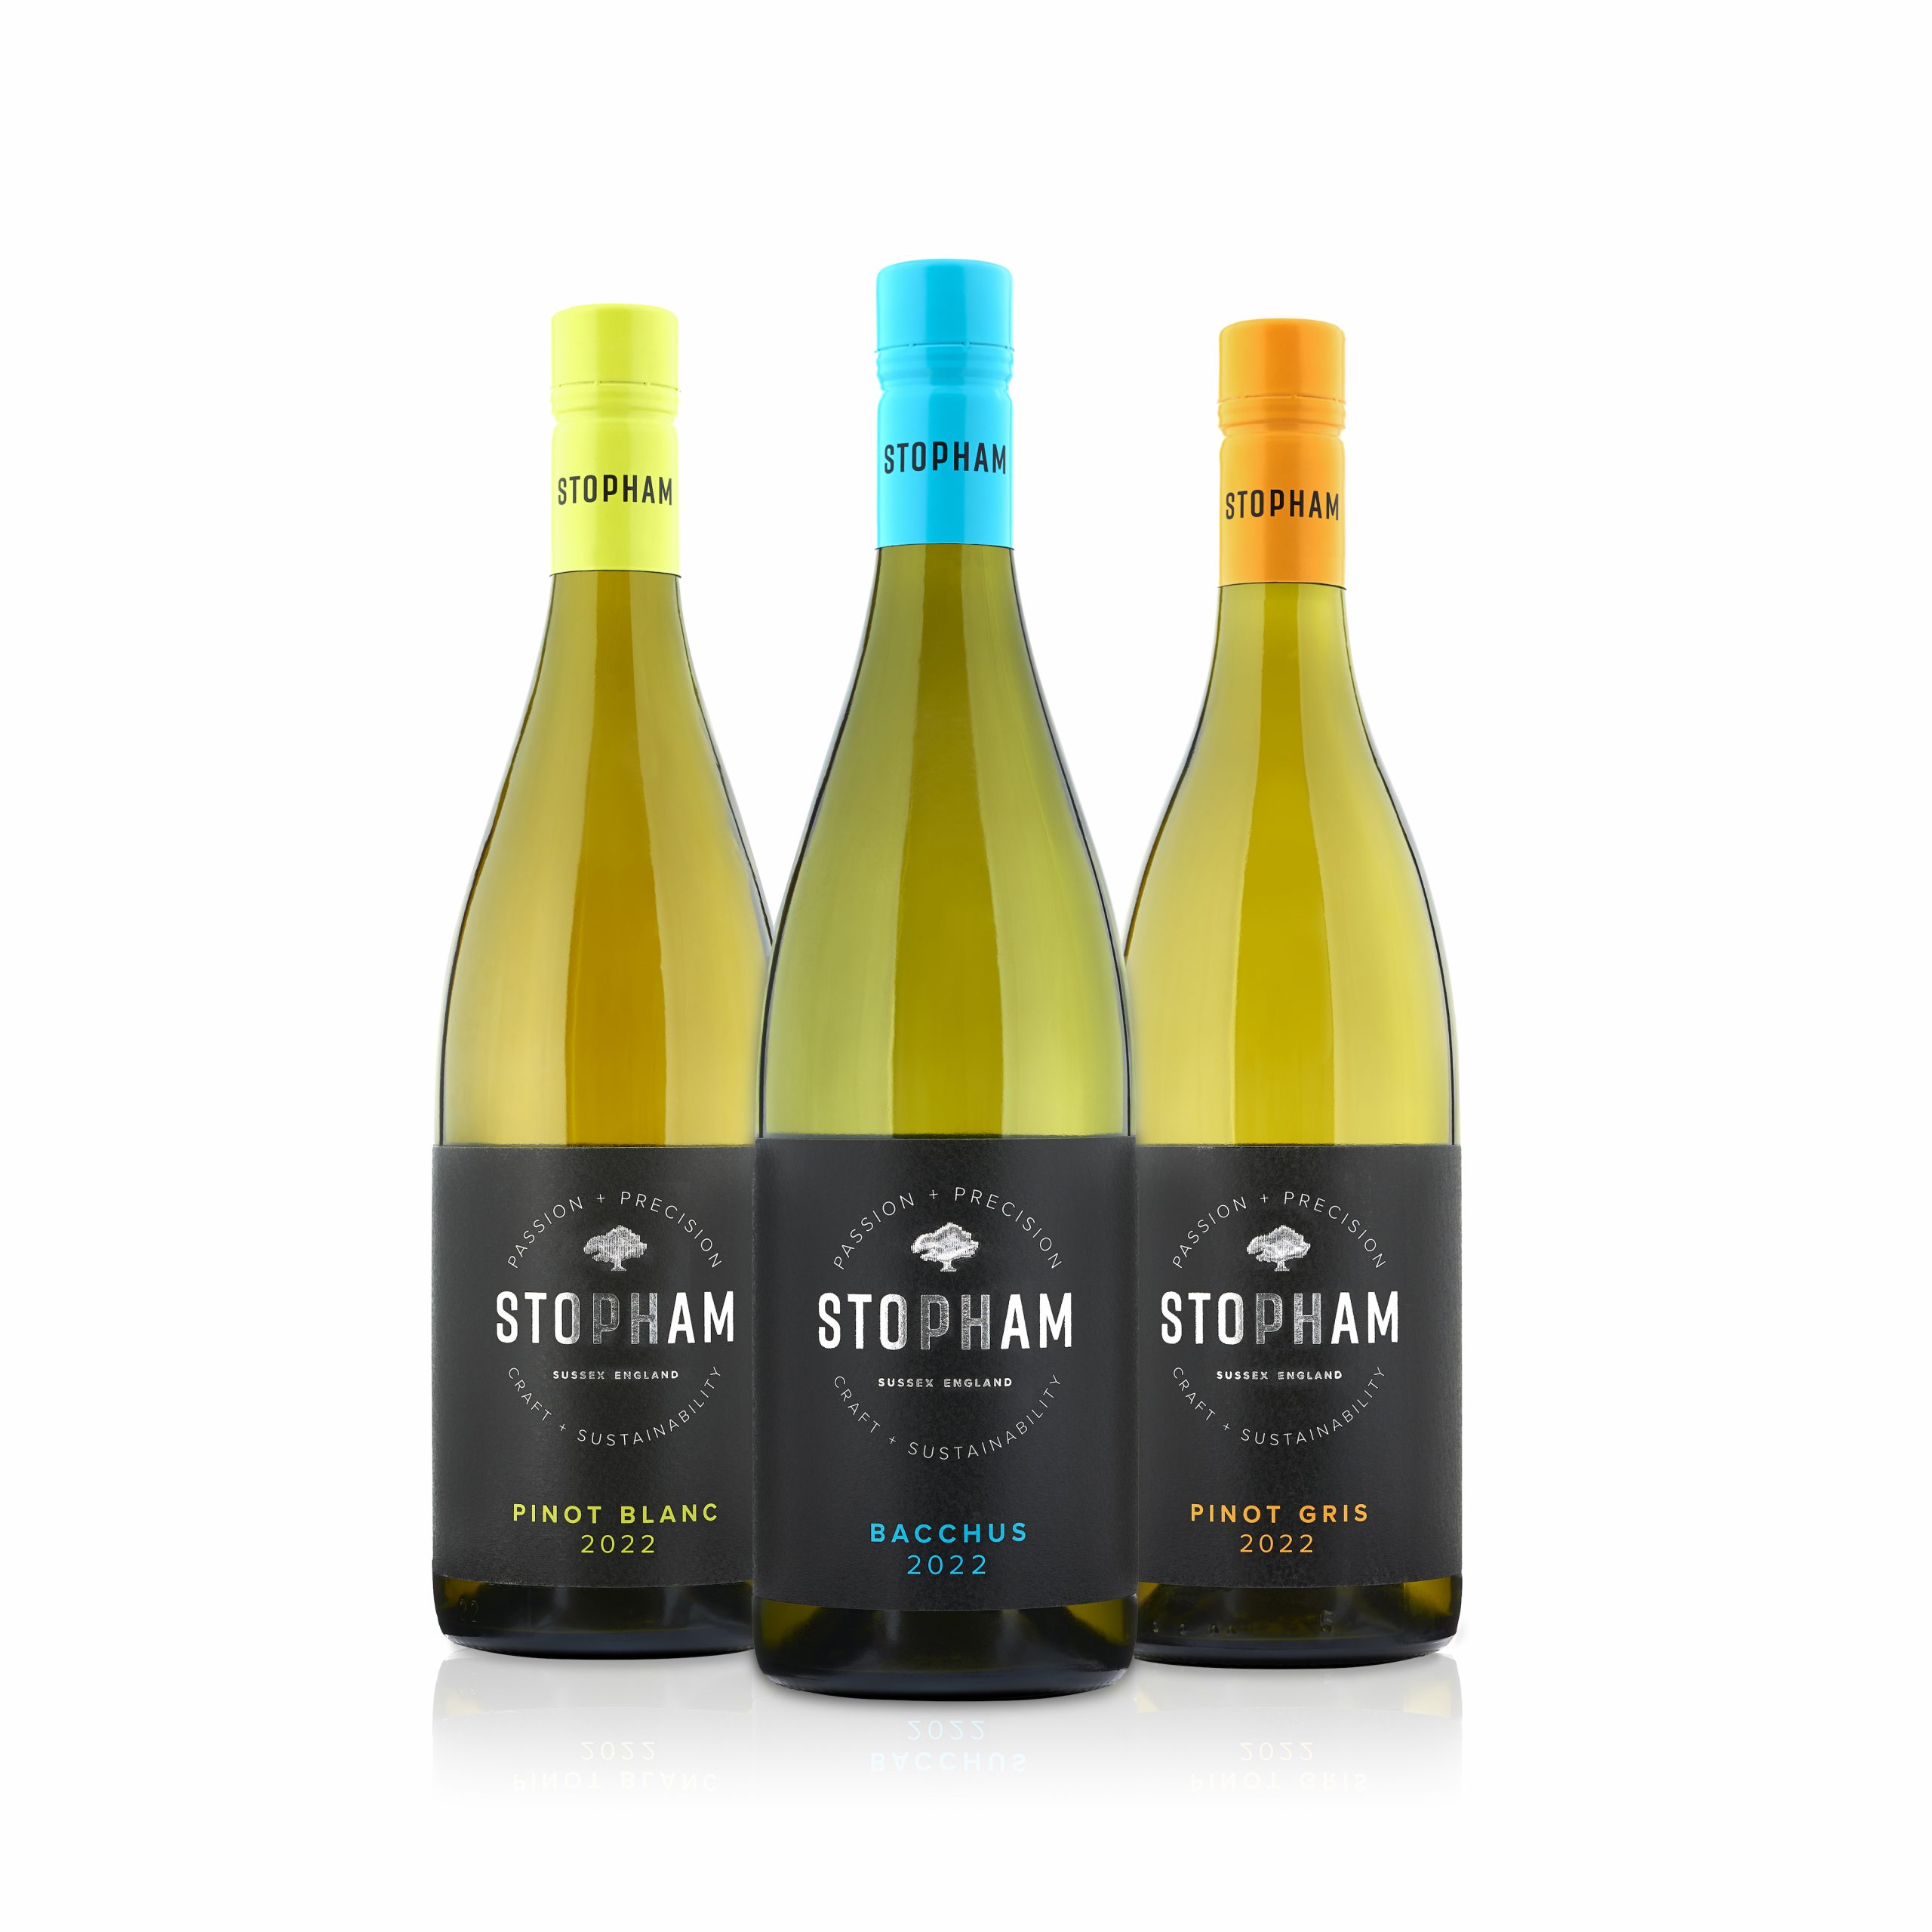 Bottles of Bacchus, Pinot Gris and Pinot Blanc from Stopham Vineyards